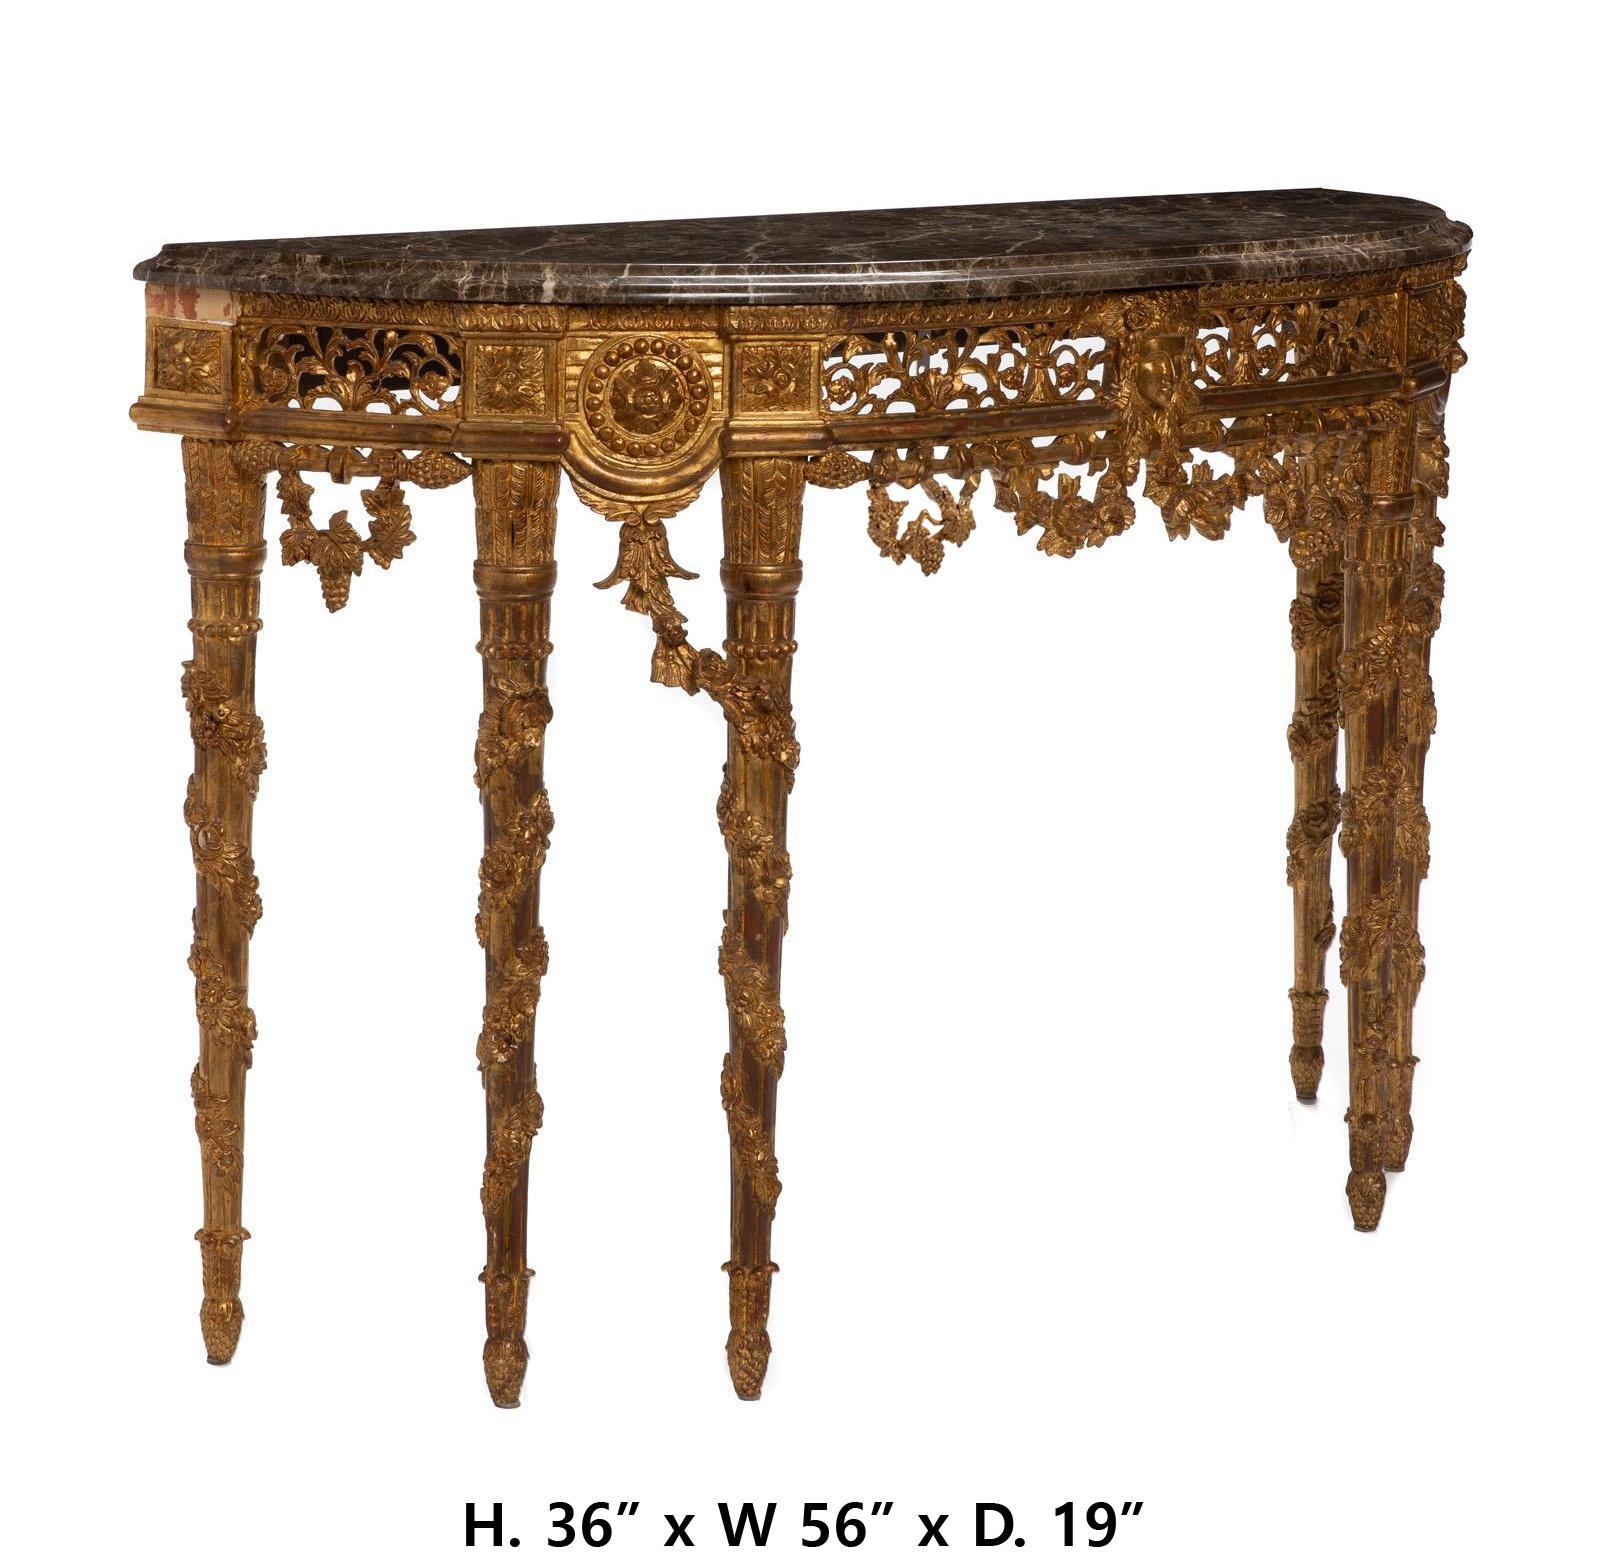 Beautiful French Louis XVI style carved giltwood demi-lune console table with marble top
Late 19th/early 20th century 
The Later demi-lune console table with a fitted taupe replaced marble top over a carved giltwood structure with openwork apron,